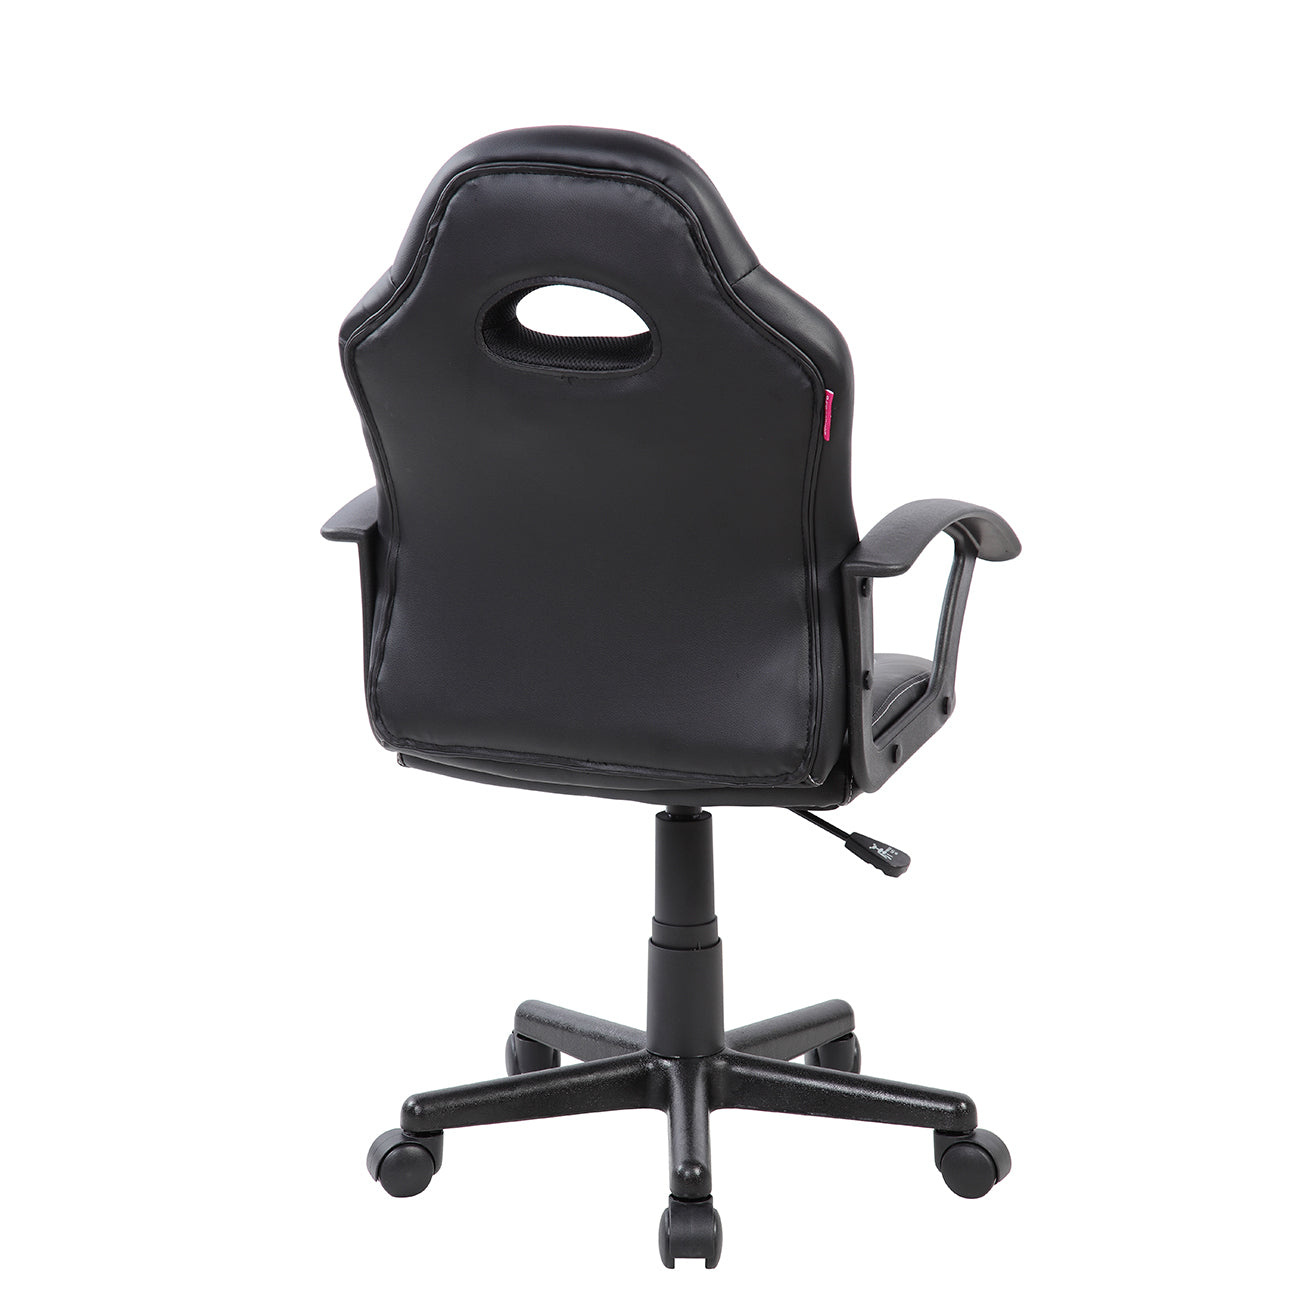 Gaming and Student Racer Chair with Wheels, Blue